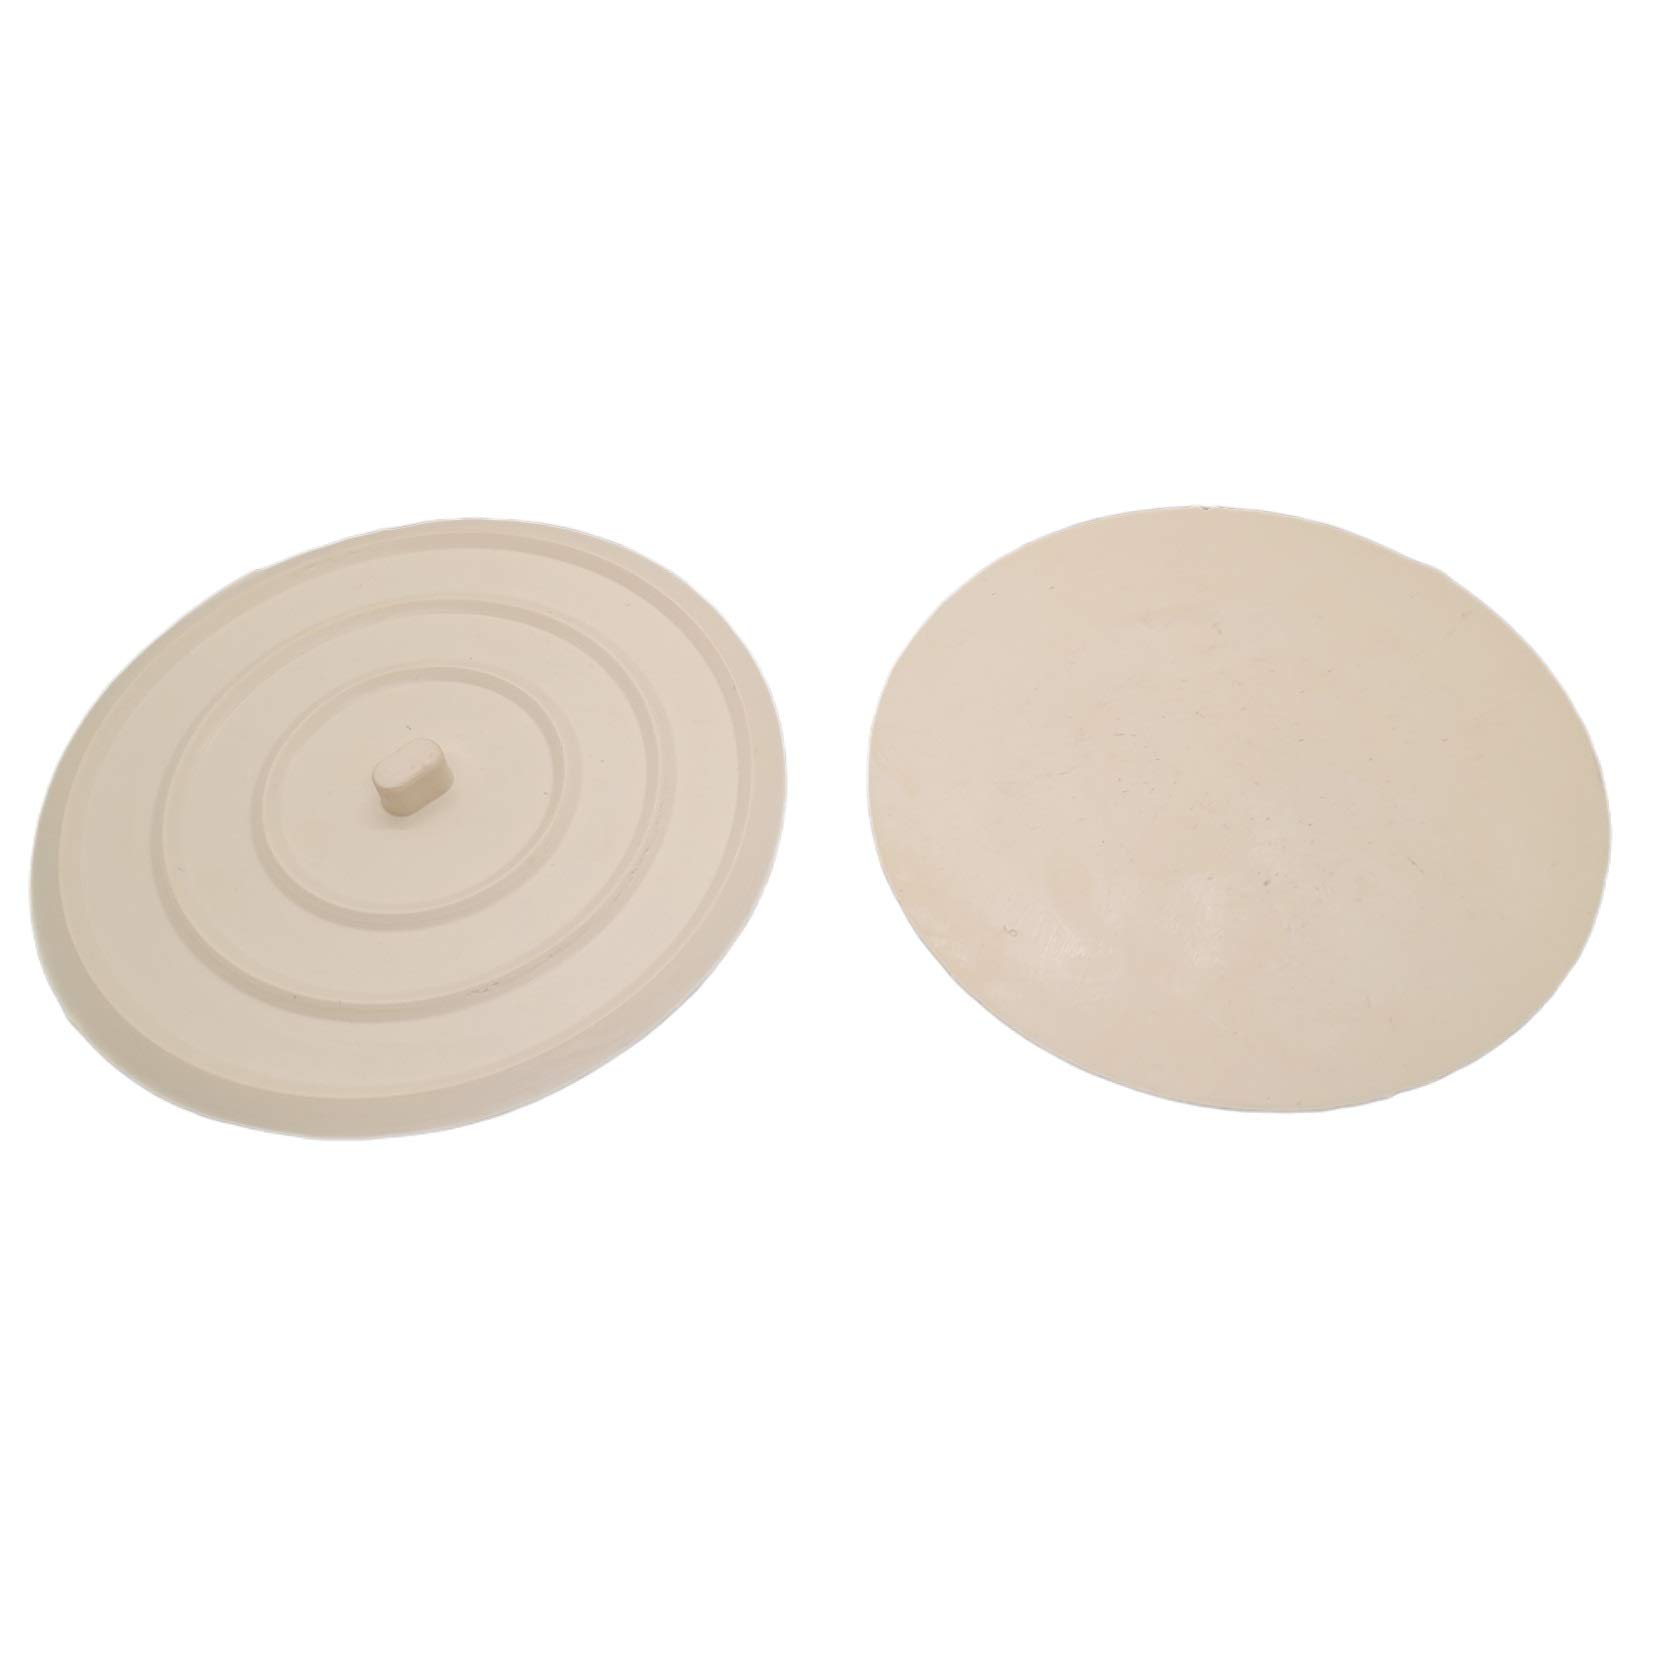 Handy Housewares Rubber Flat Suction Sink Stopper 2pc Set - Fits Most Standard Sink, Tub & Shower Drains (1 Set (2 Stoppers))